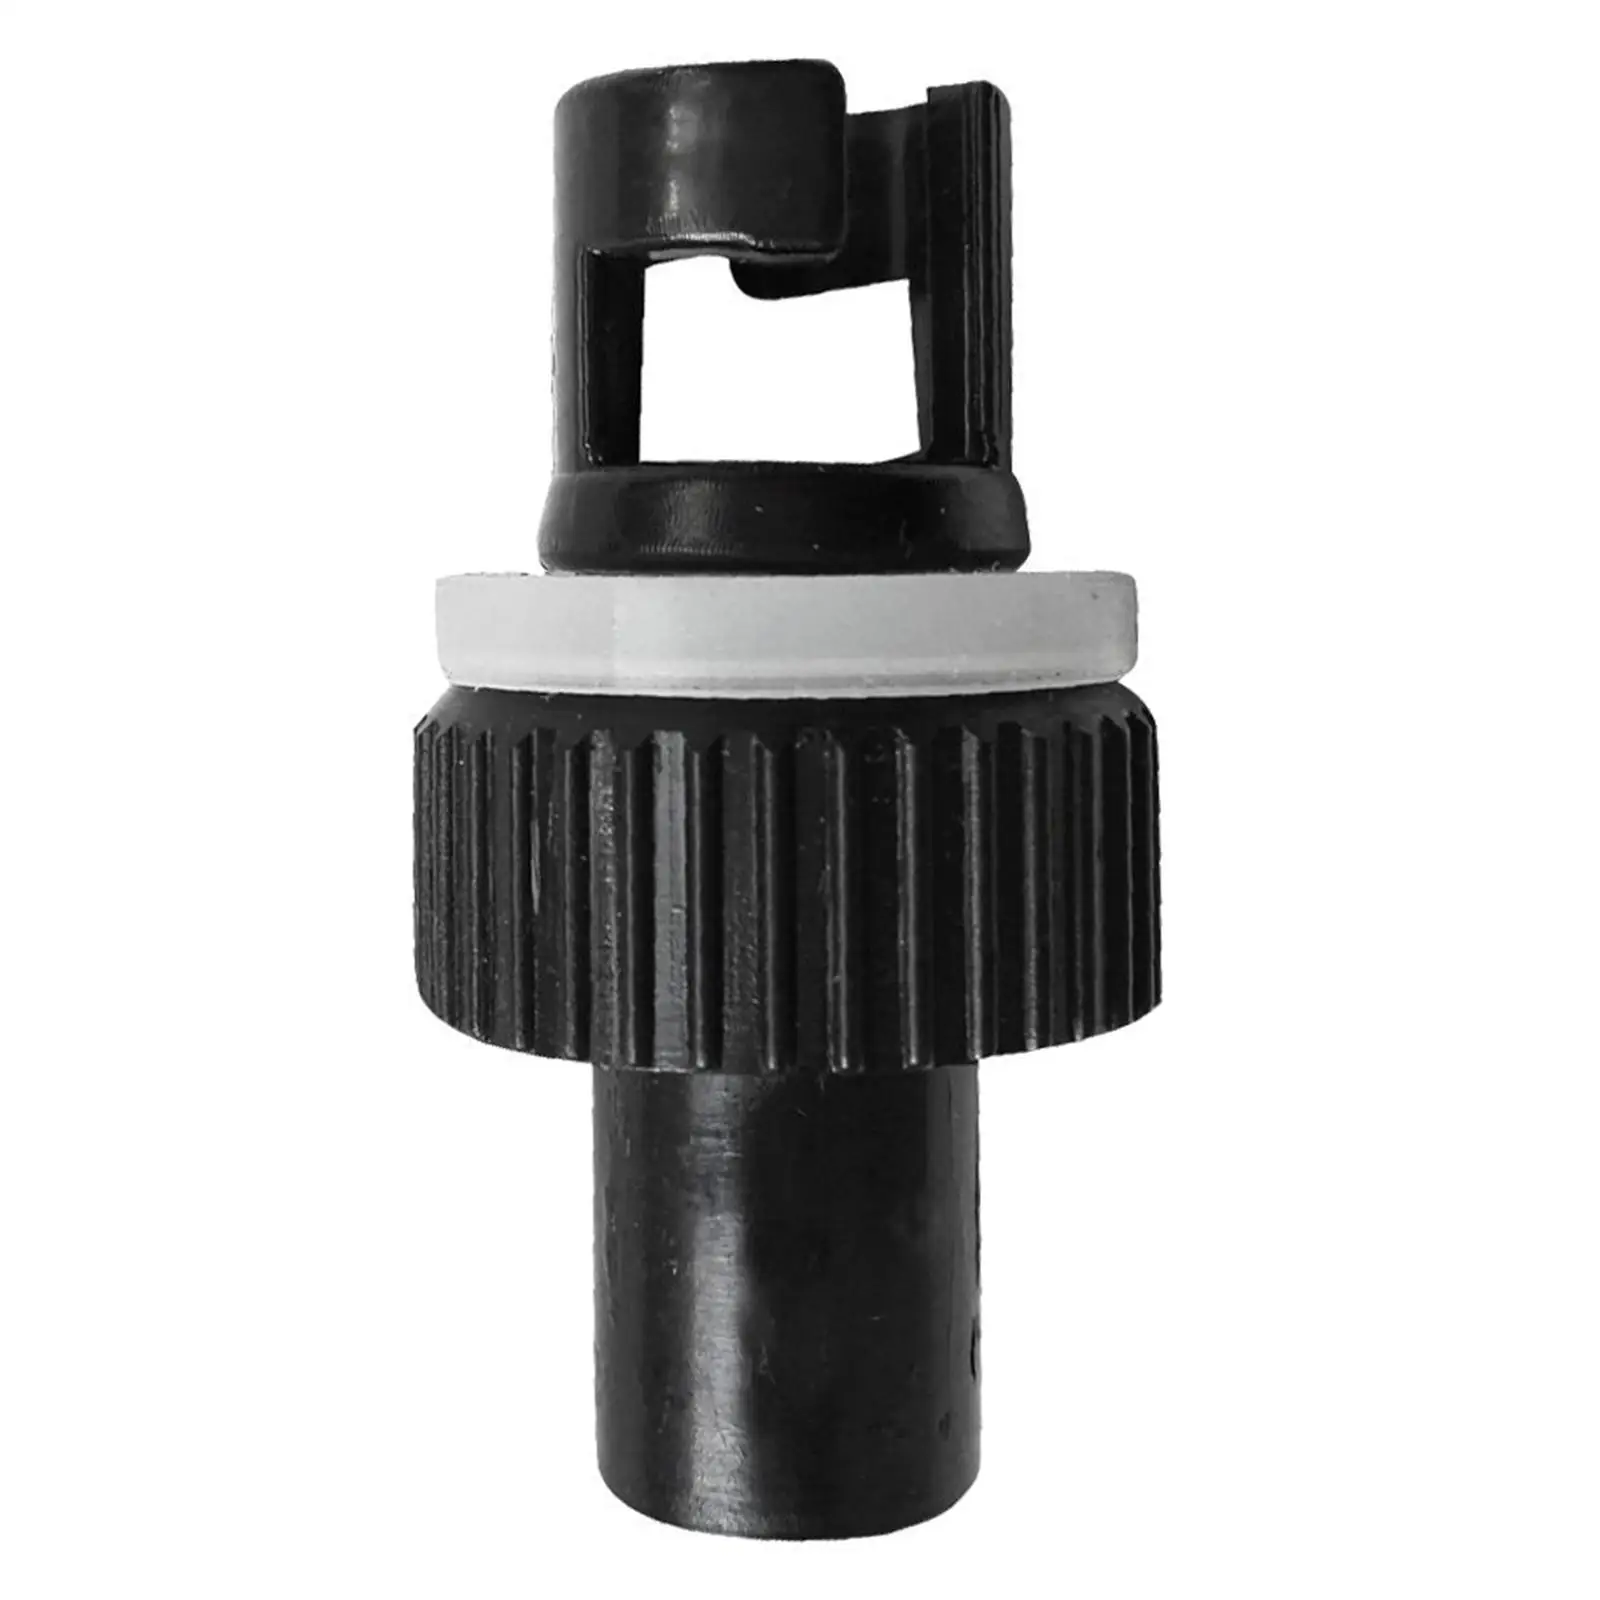 Hose Adapter Connector Accessories Water Sport PVC Air Foot Pump Air Valve for